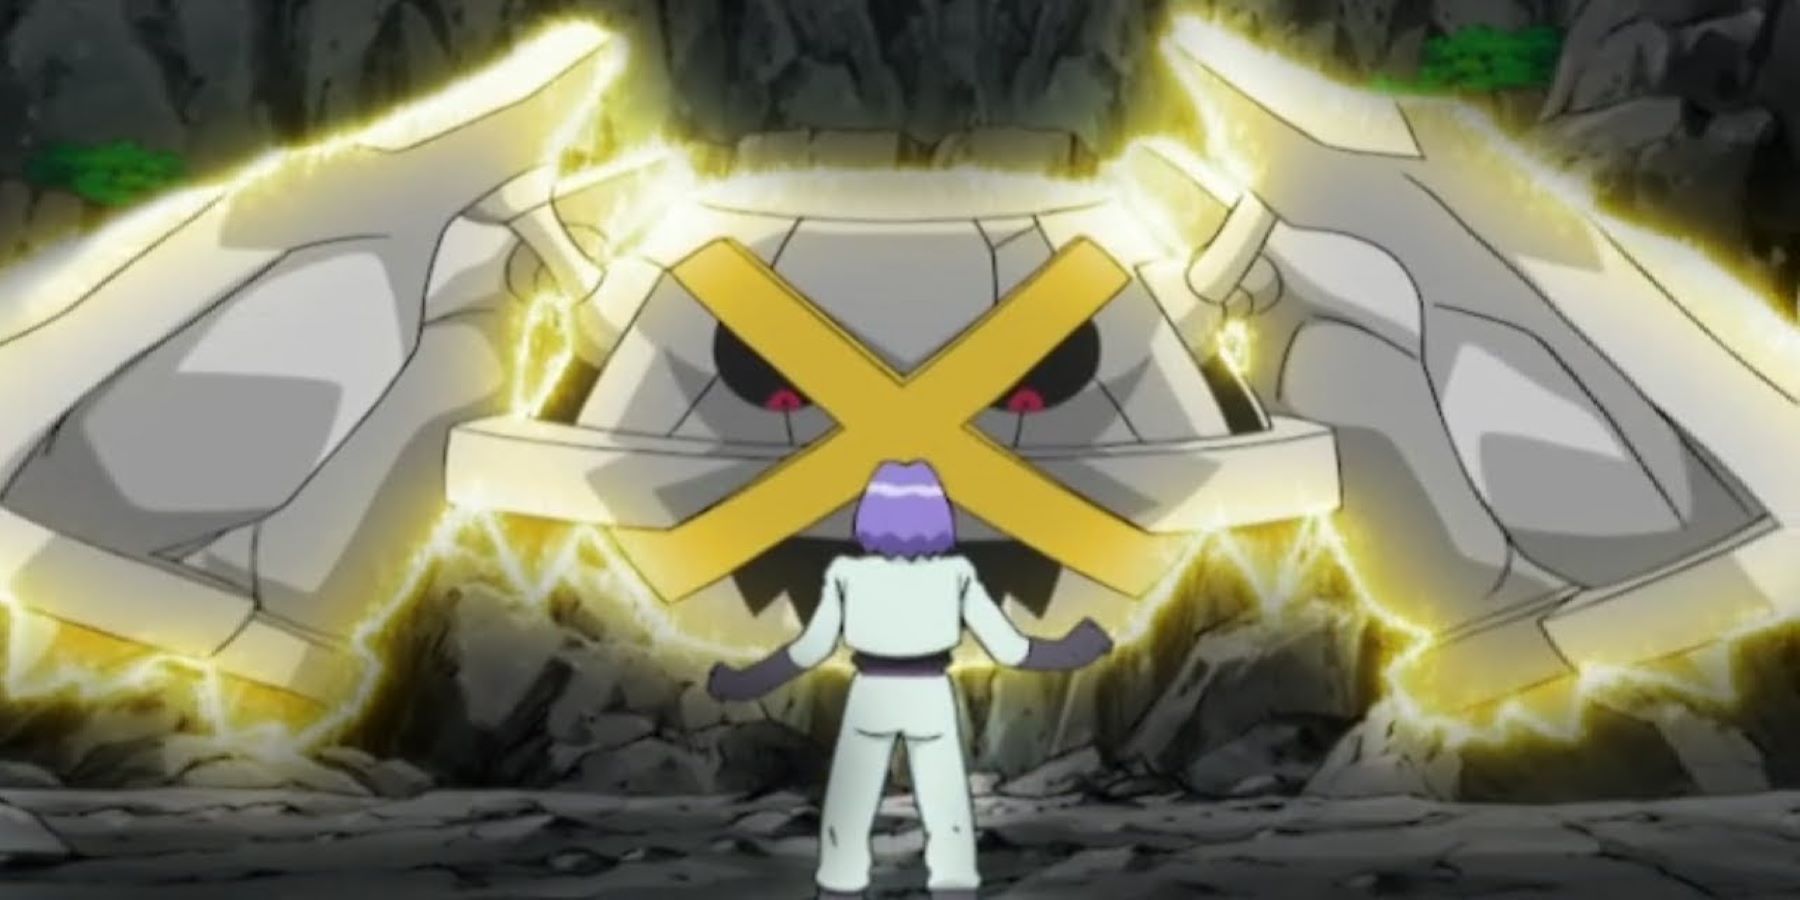 Team Rocket's James confronting a Shiny Metagross in the Pokemon anime